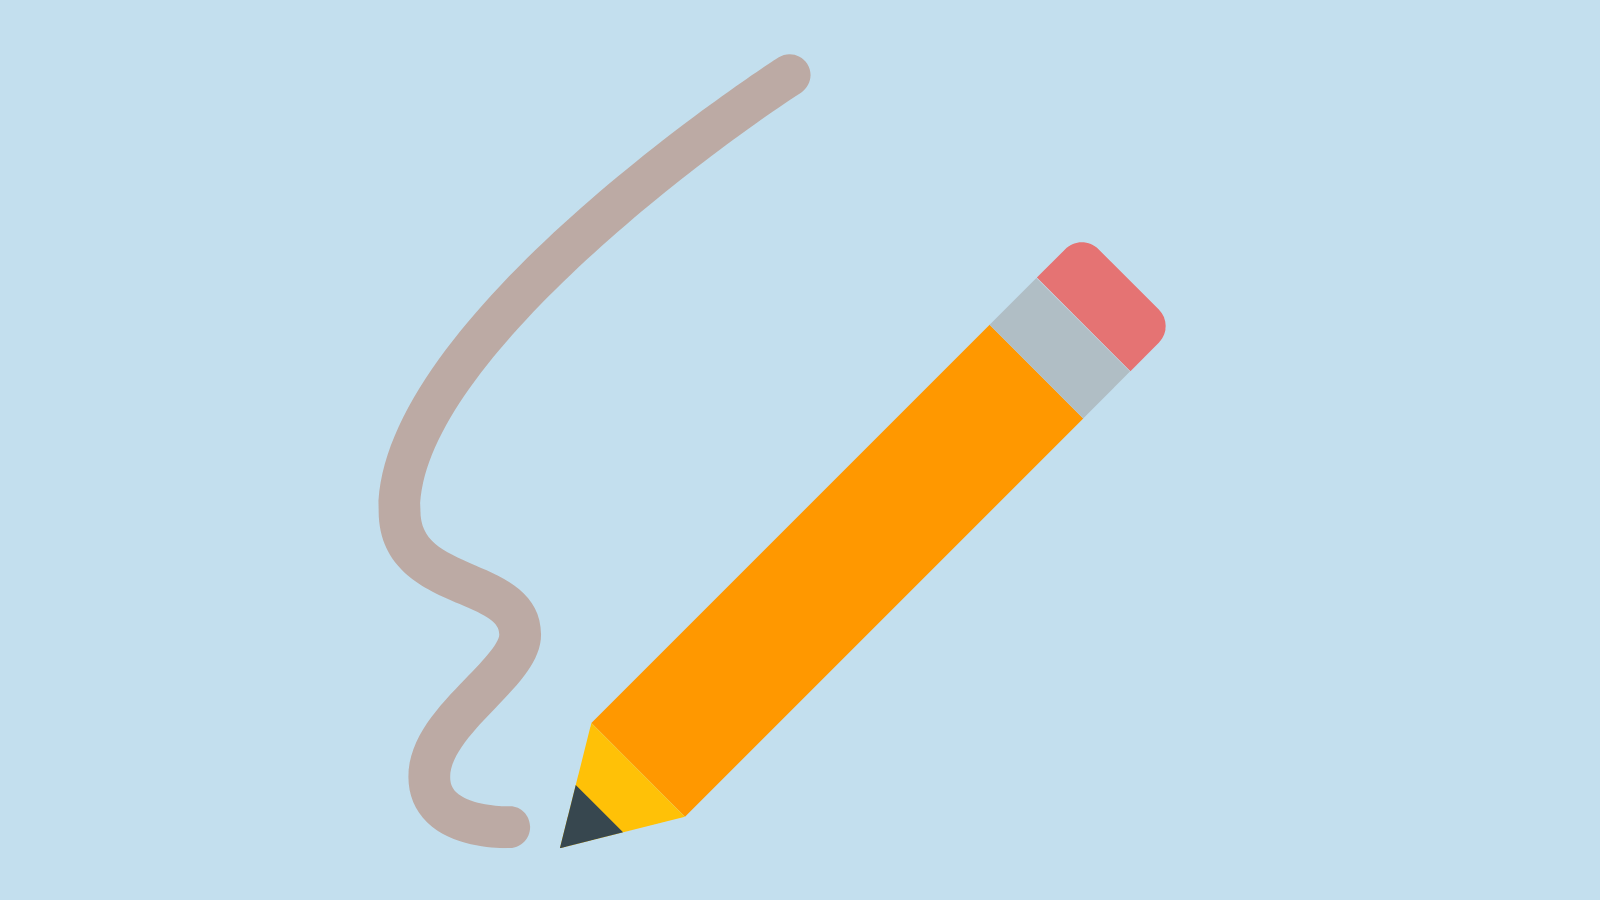 A pencil in the process of writing